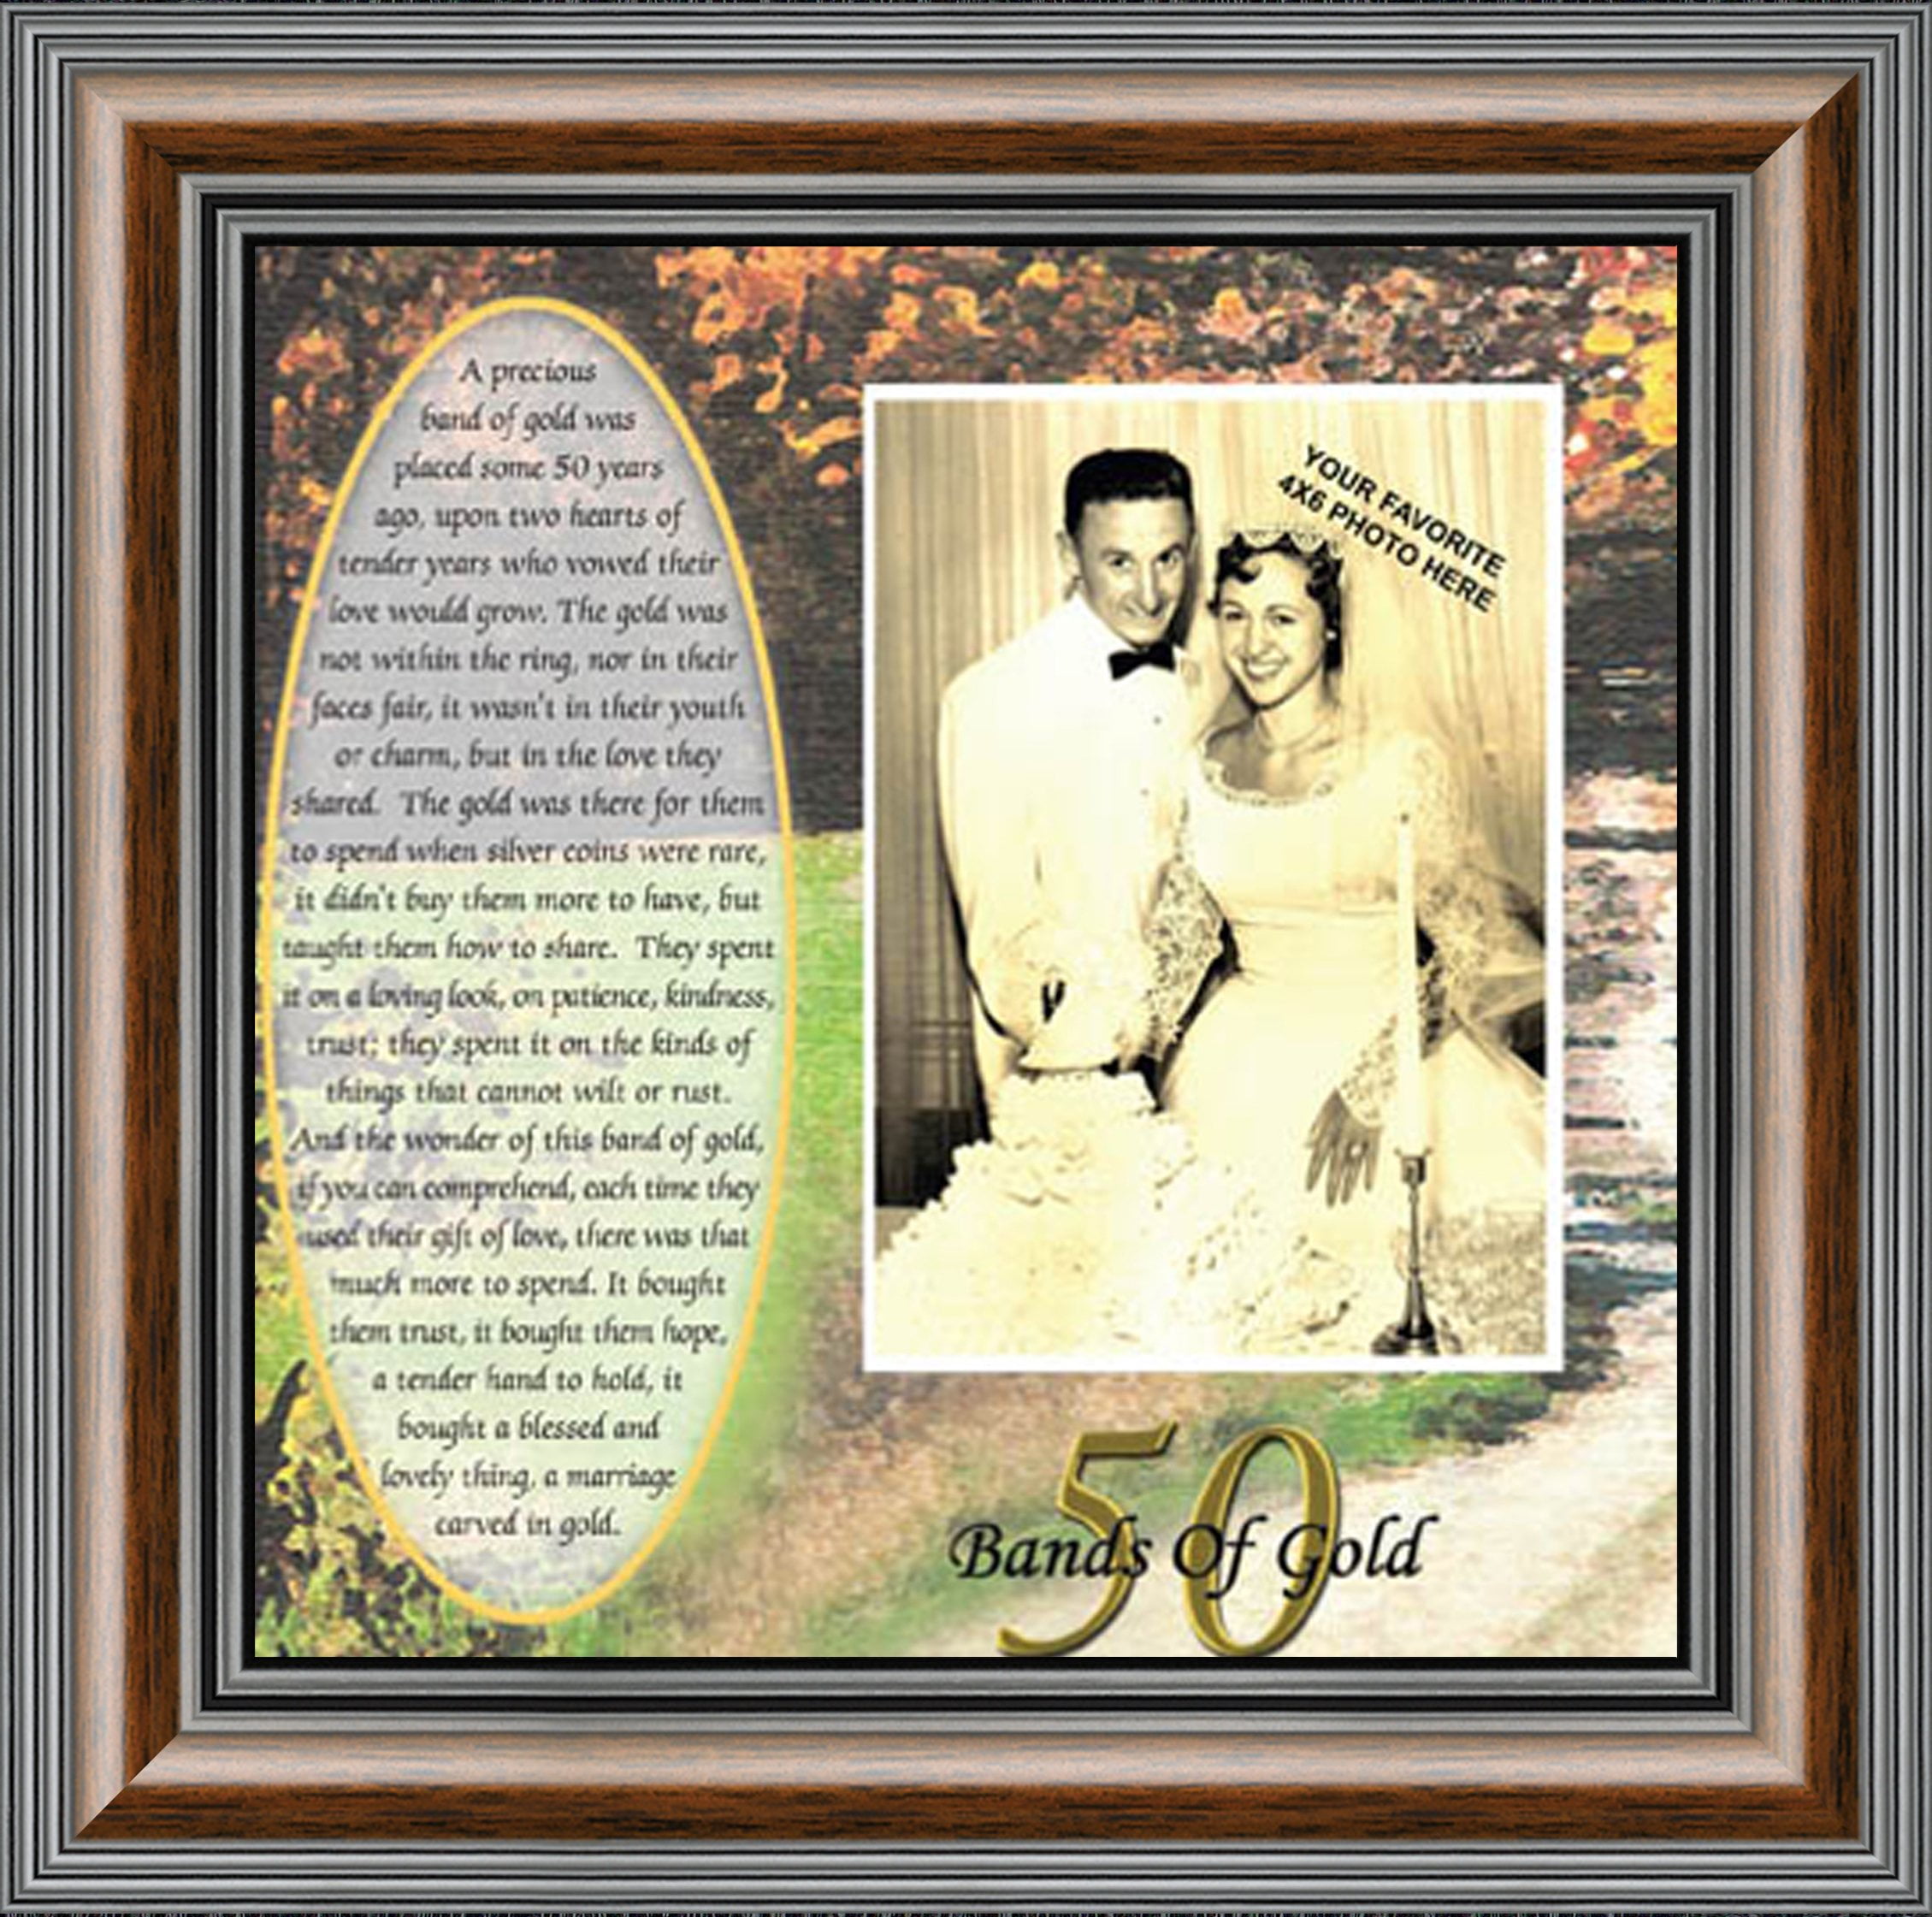 50th Wedding Anniversary Gifts For Parents Or Couples 50th Anniversary Decorations For Party Golden Anniversary 50 Year Gifts Gift To Add To A 50th Anniversary Card 6779 Walmart Com Walmart Com,Roof Replacement Cost Calculator